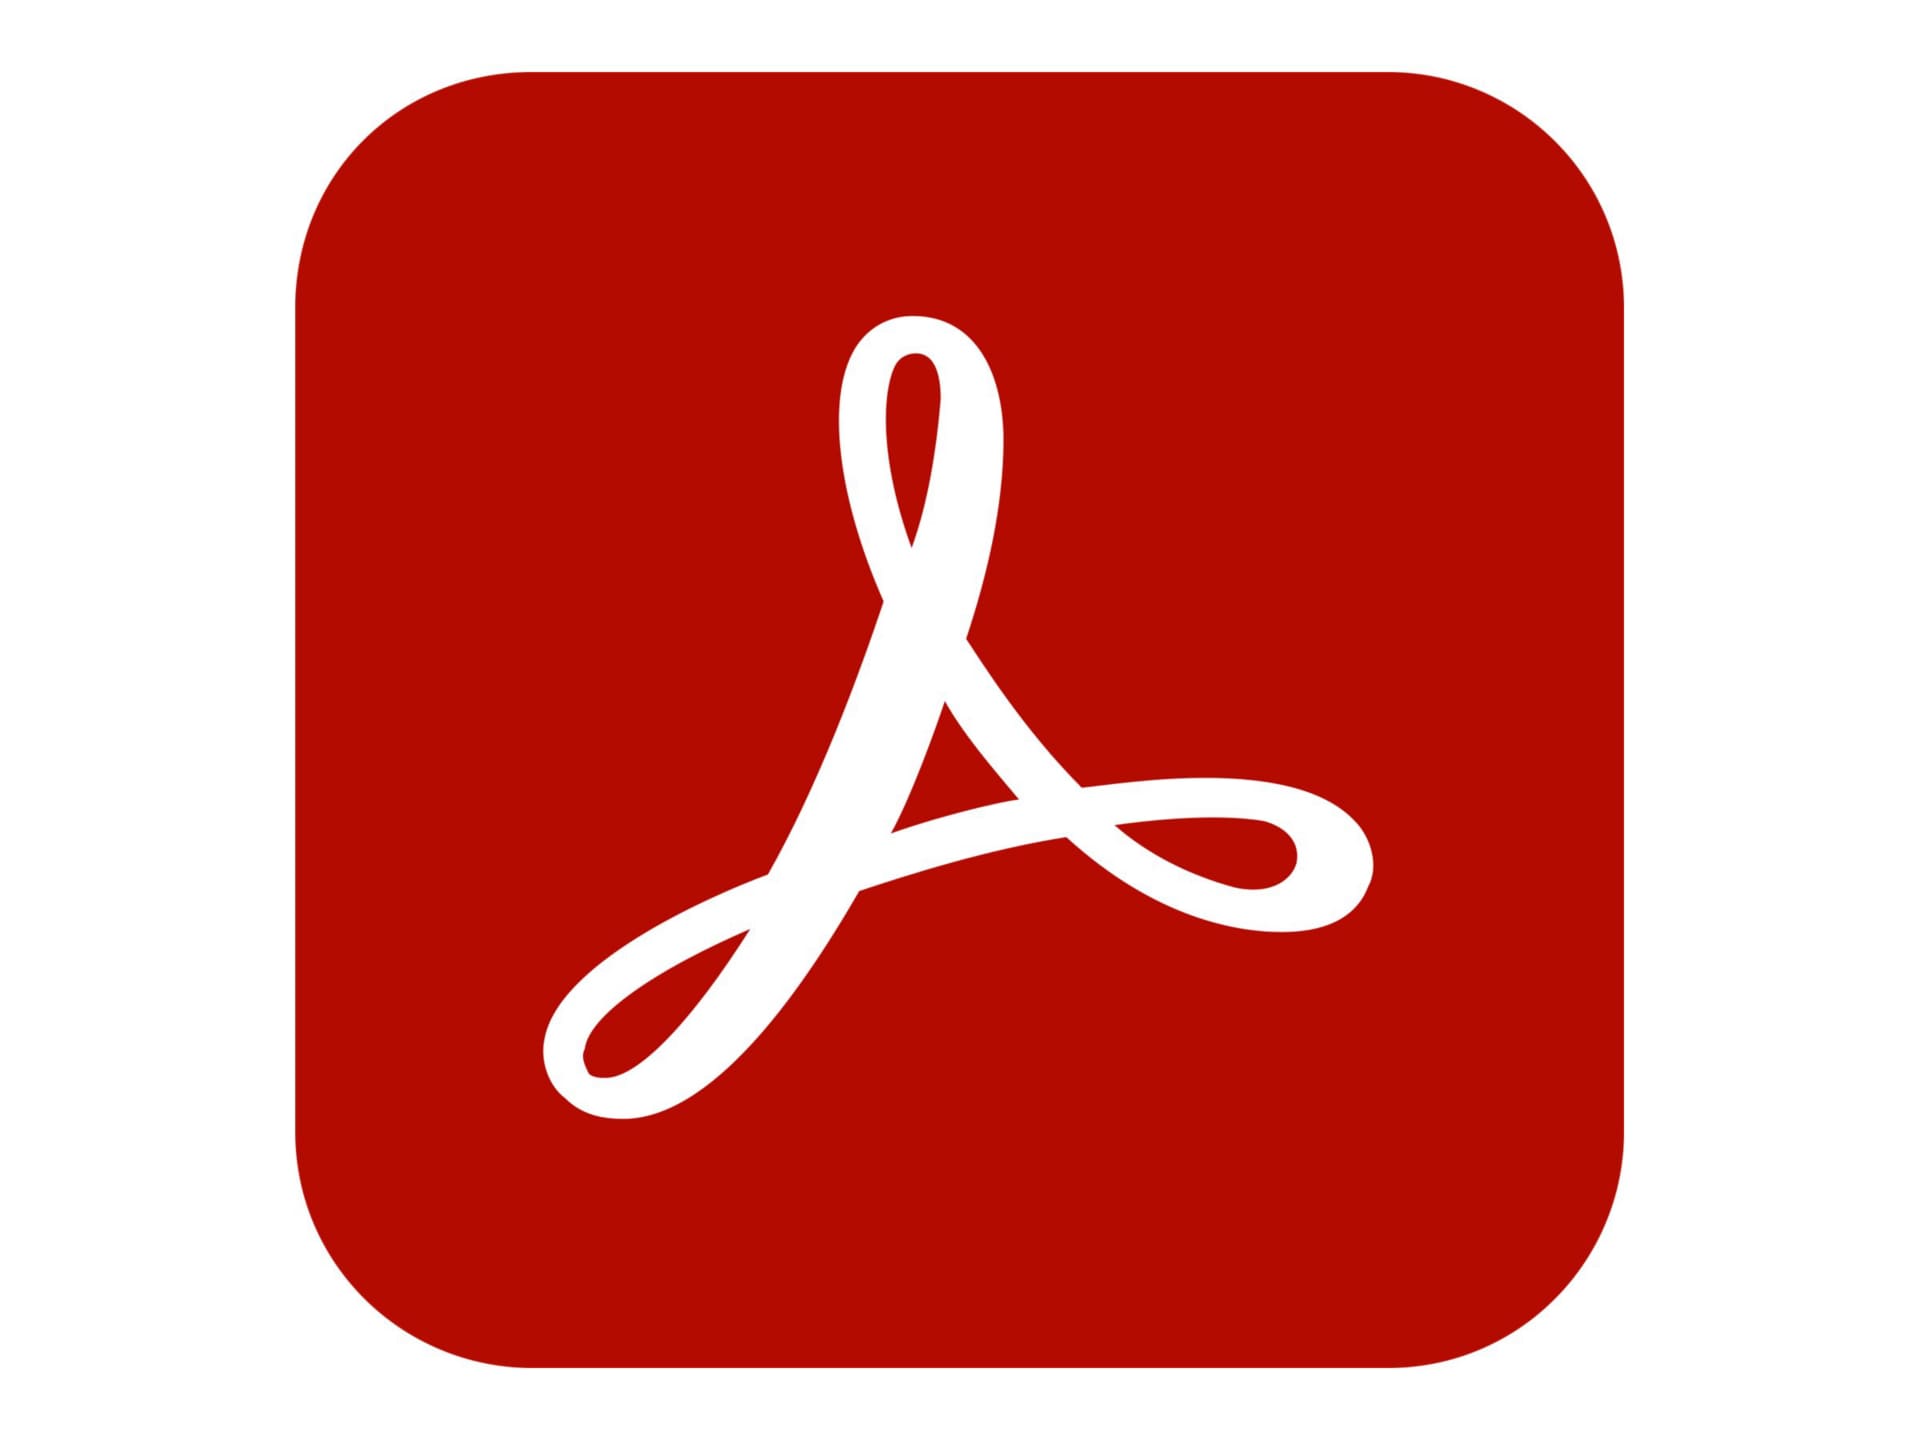 Adobe Acrobat Pro DC for Enterprise - Feature Restricted Licensing Subscription New - 1 user